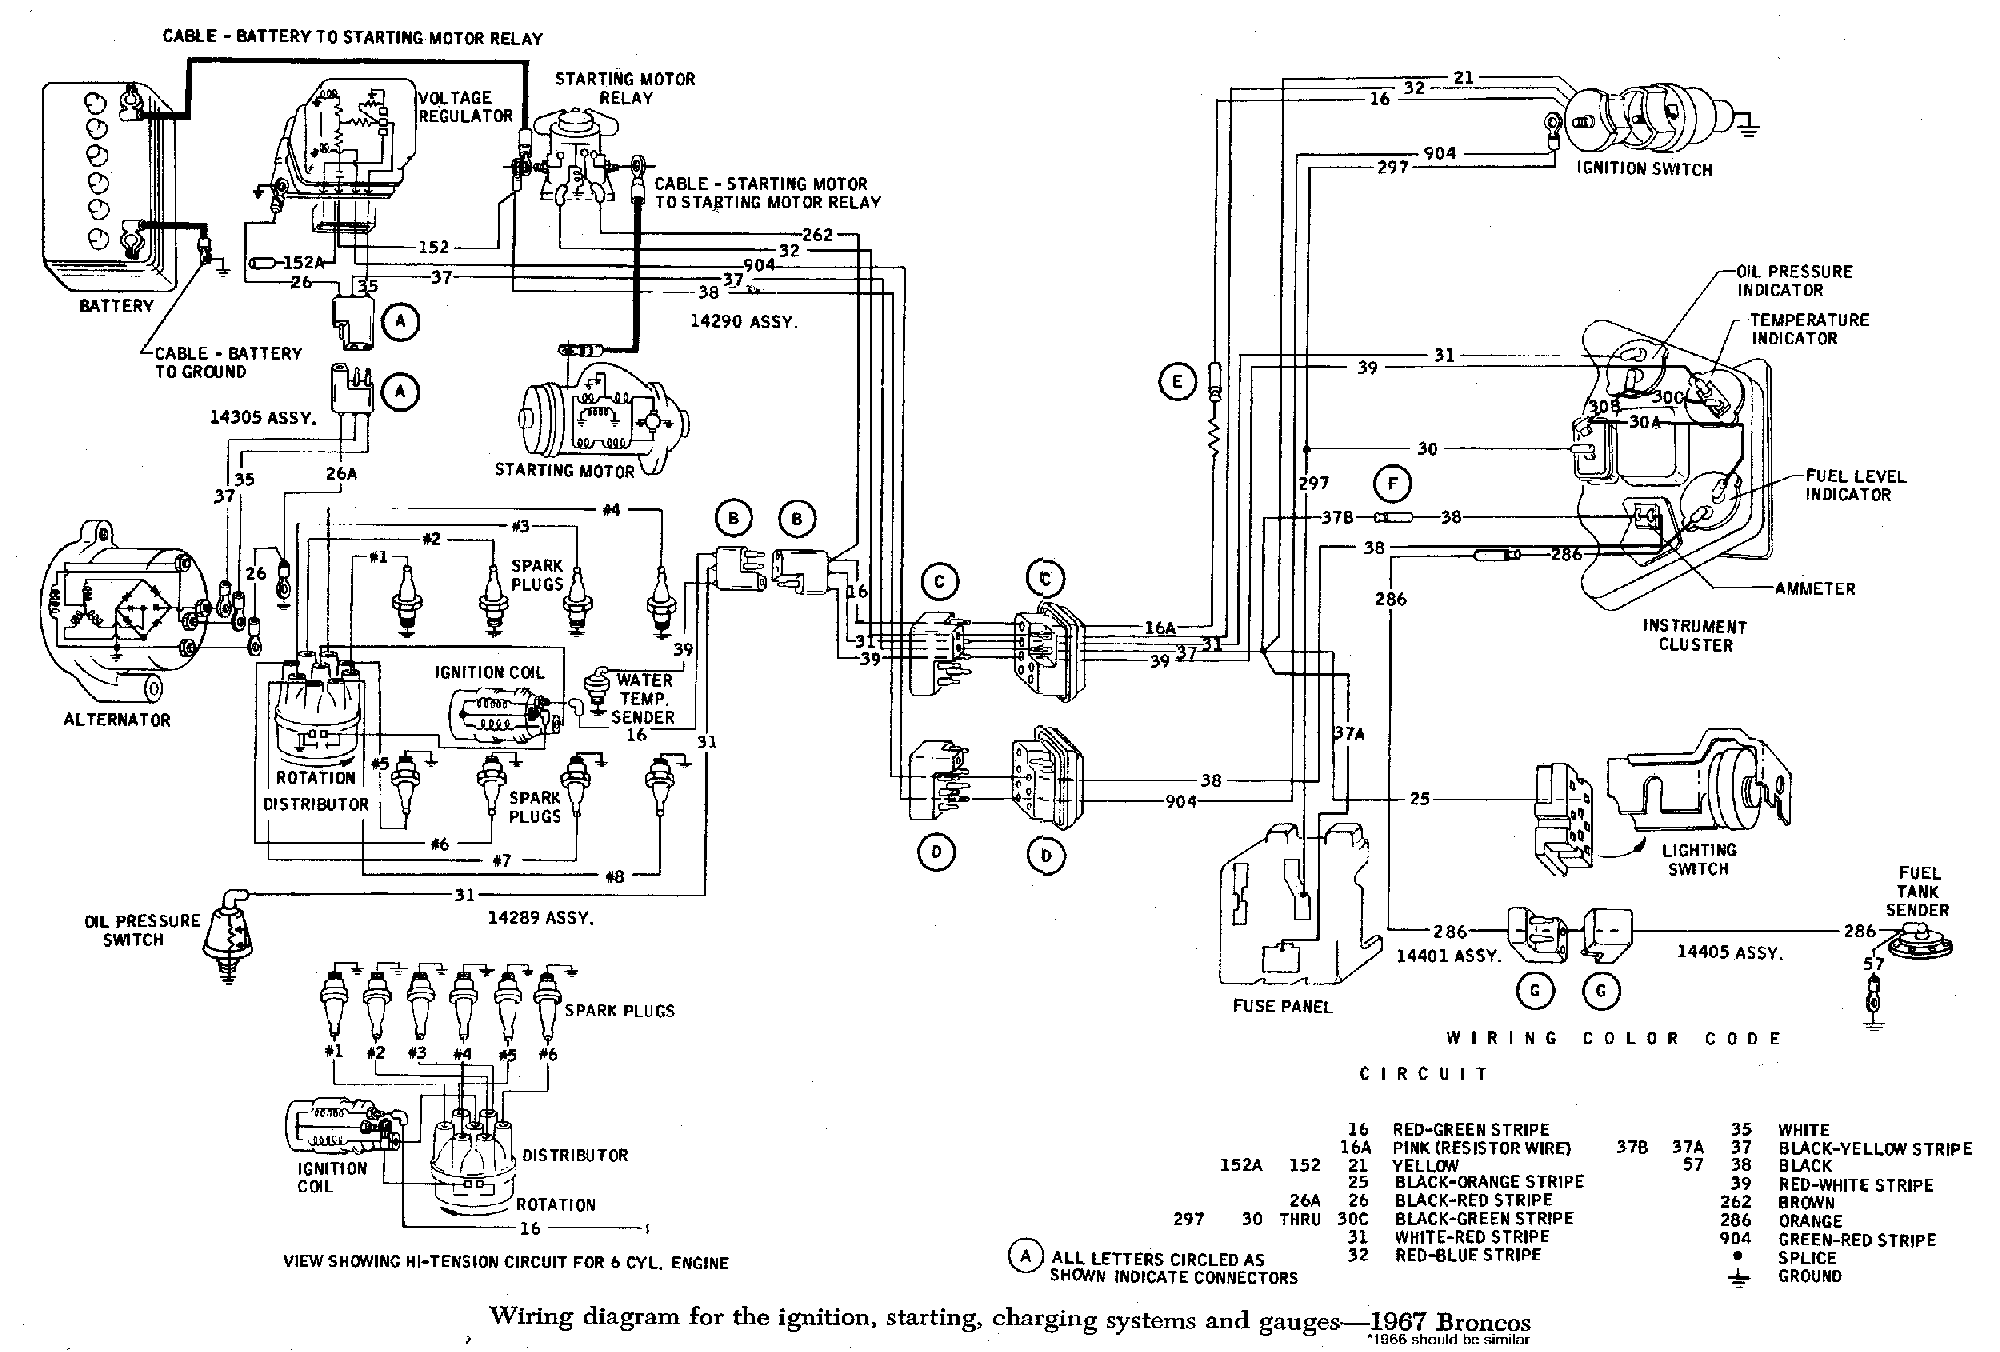 Wiring problem...Help - 66-77 Early Bronco Tech Support - Ford Bronco